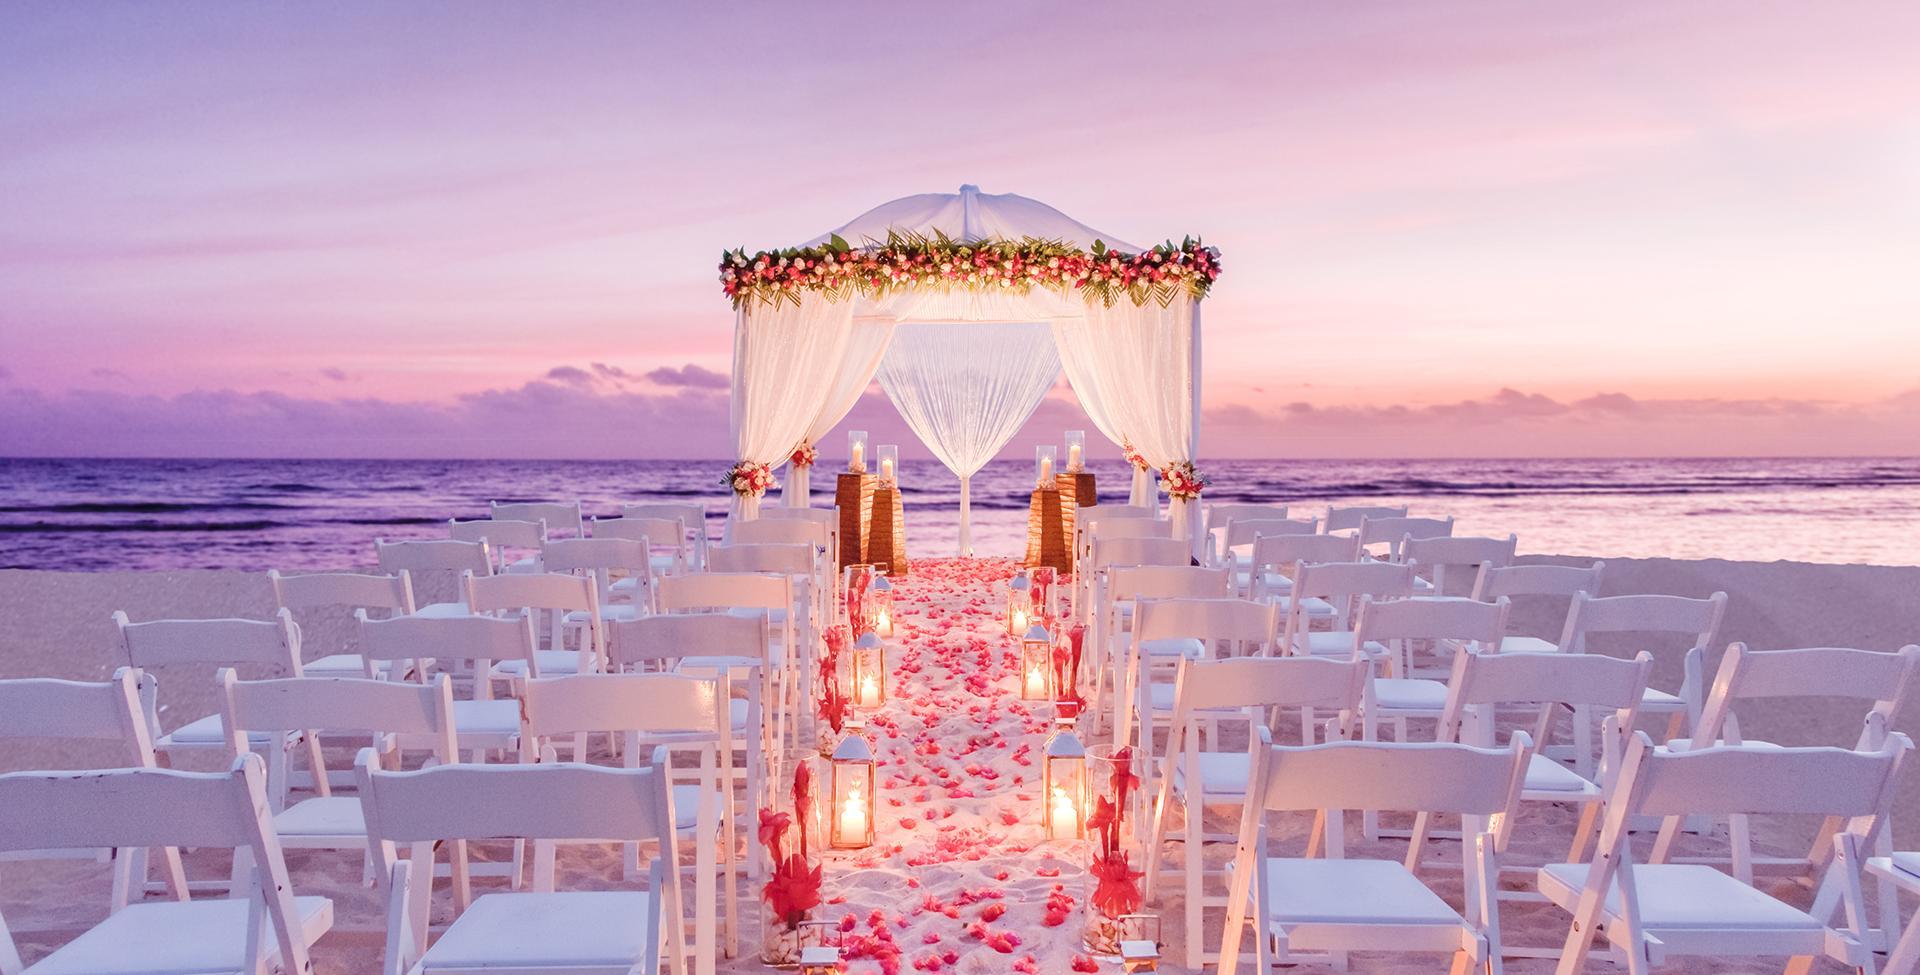 A wedding ceremony set up with chairs and a canopy